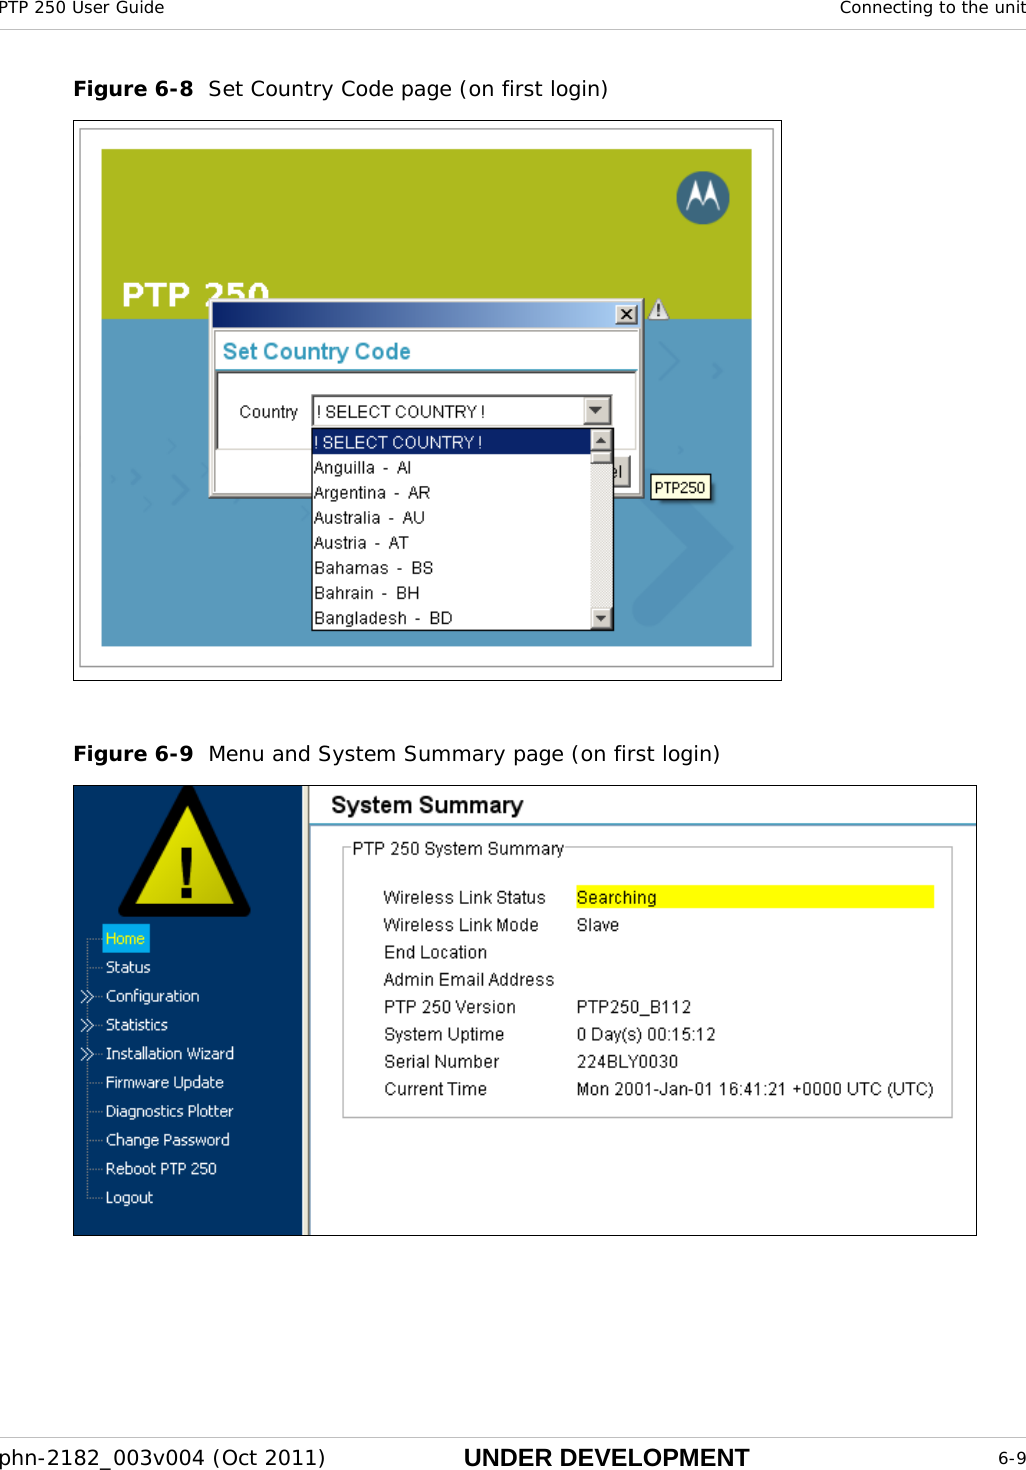 PTP 250 User Guide  Connecting to the unit  phn-2182_003v004 (Oct 2011)  UNDER DEVELOPMENT  6-9  Figure 6-8  Set Country Code page (on first login)   Figure 6-9  Menu and System Summary page (on first login)    